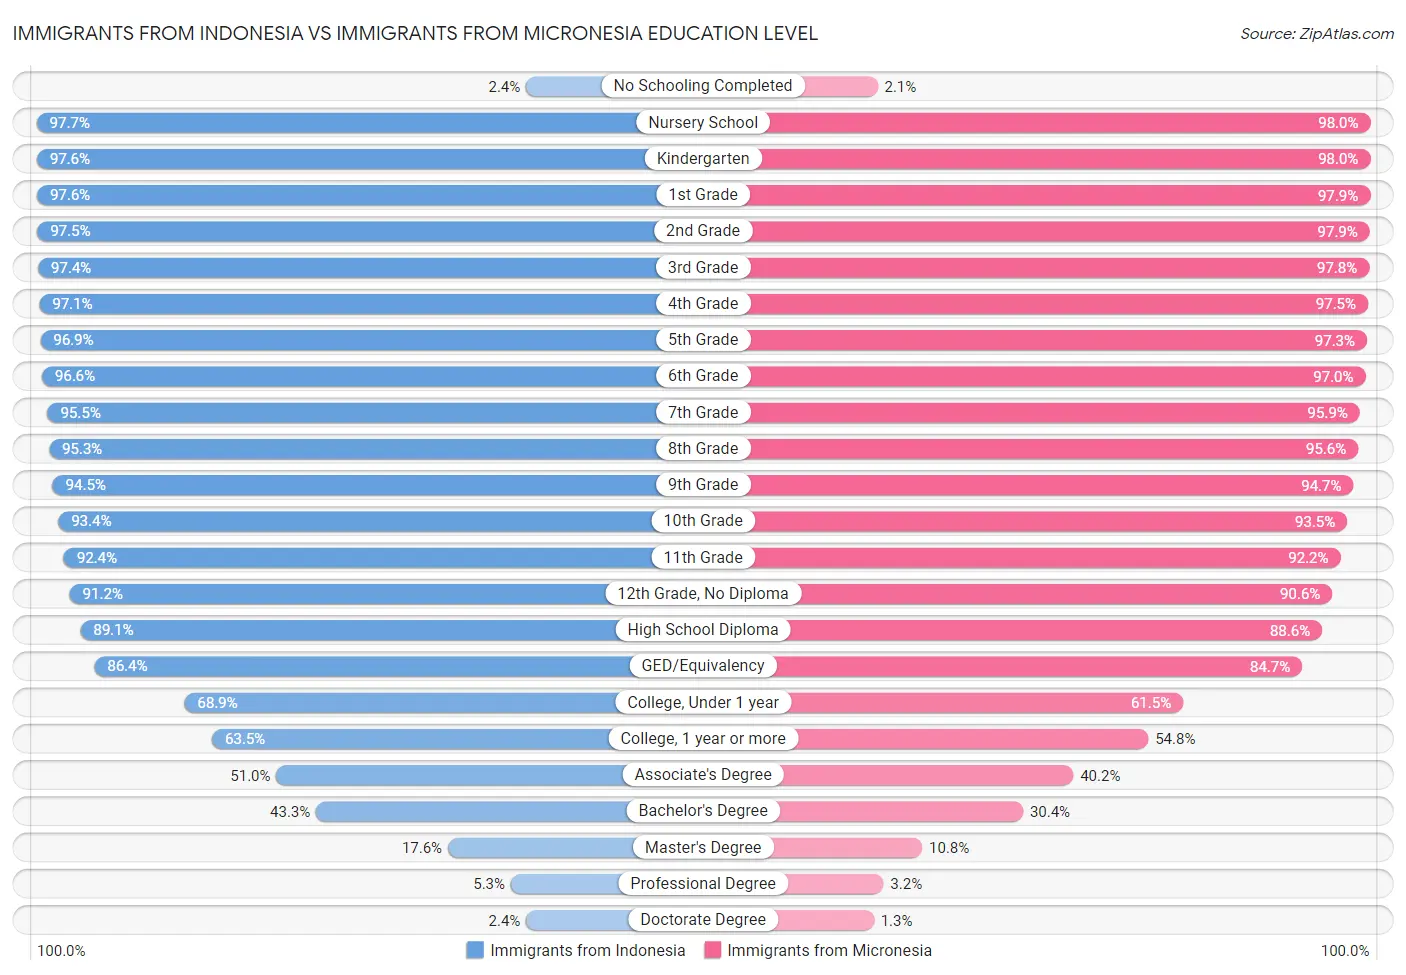 Immigrants from Indonesia vs Immigrants from Micronesia Education Level